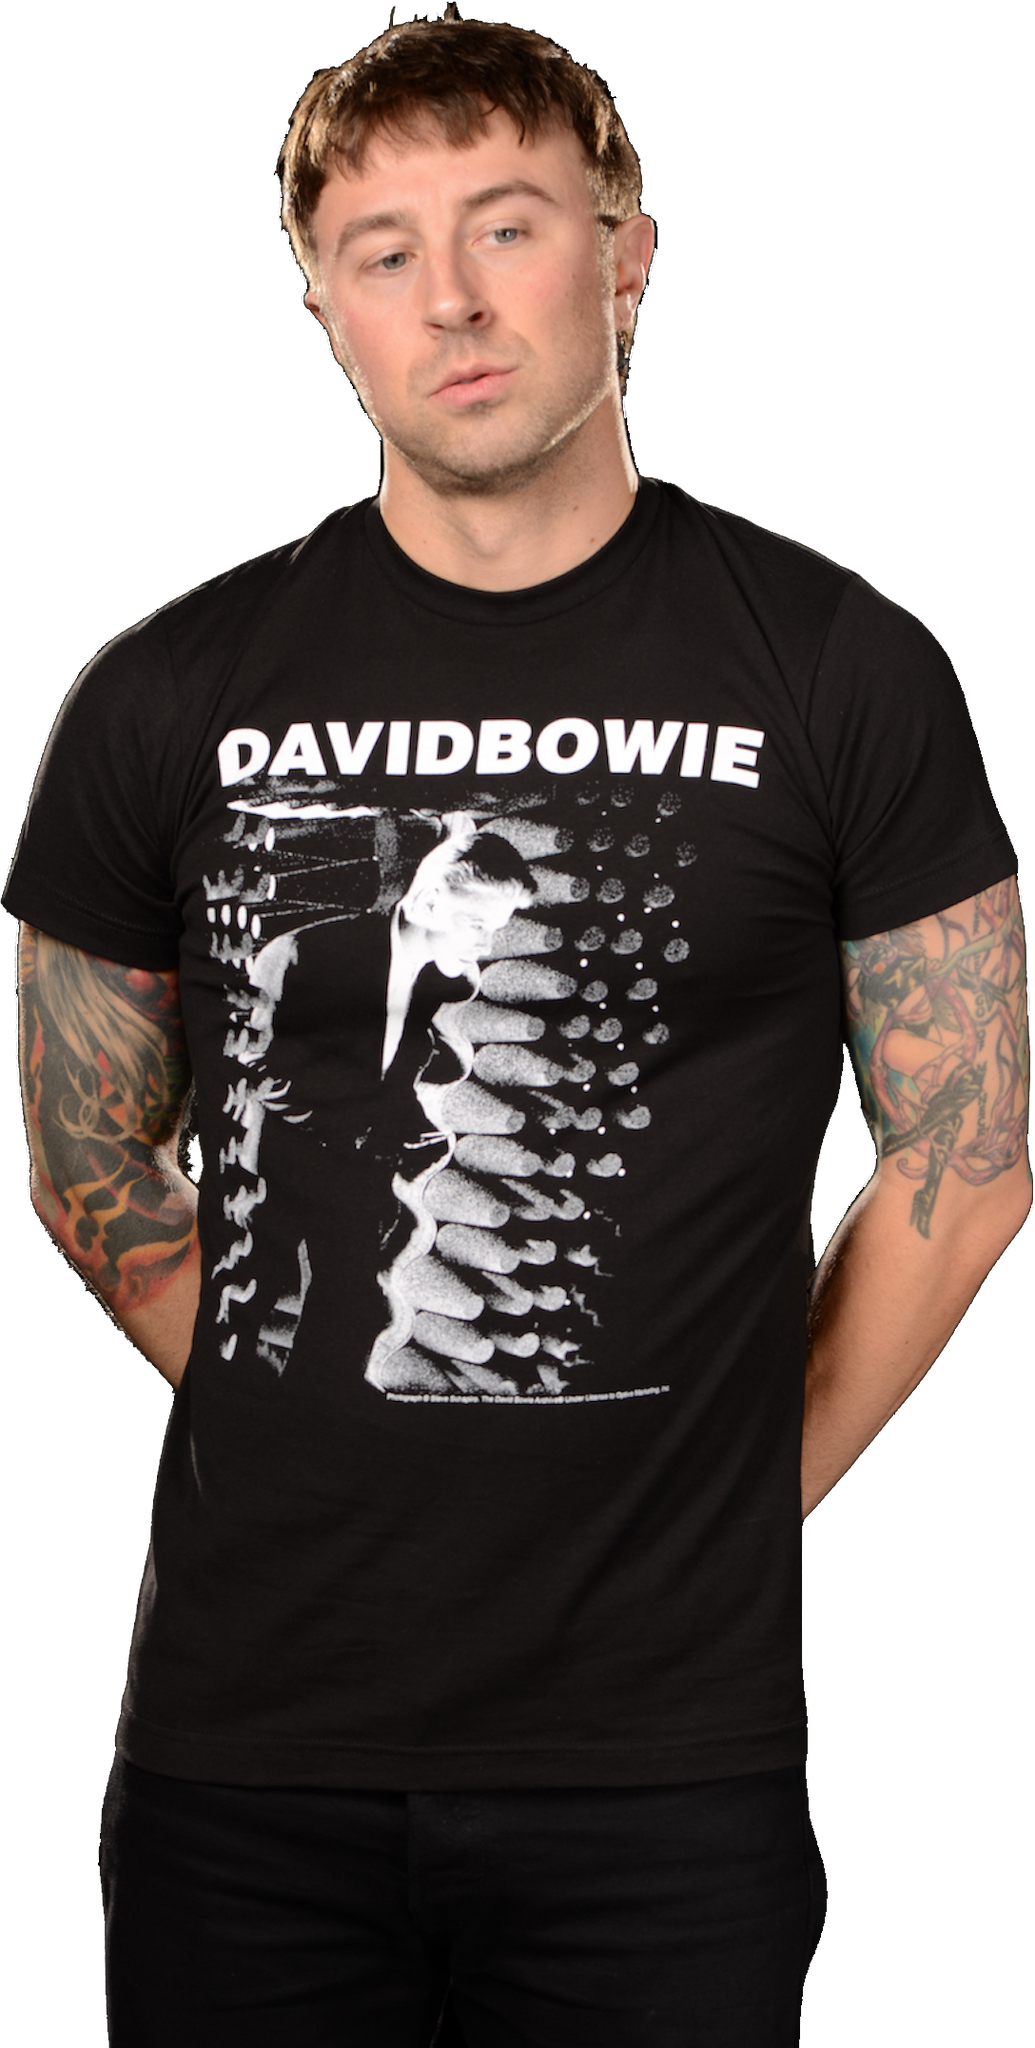 DAVID BOWIE "STATION TO STATION" T-SHIRT